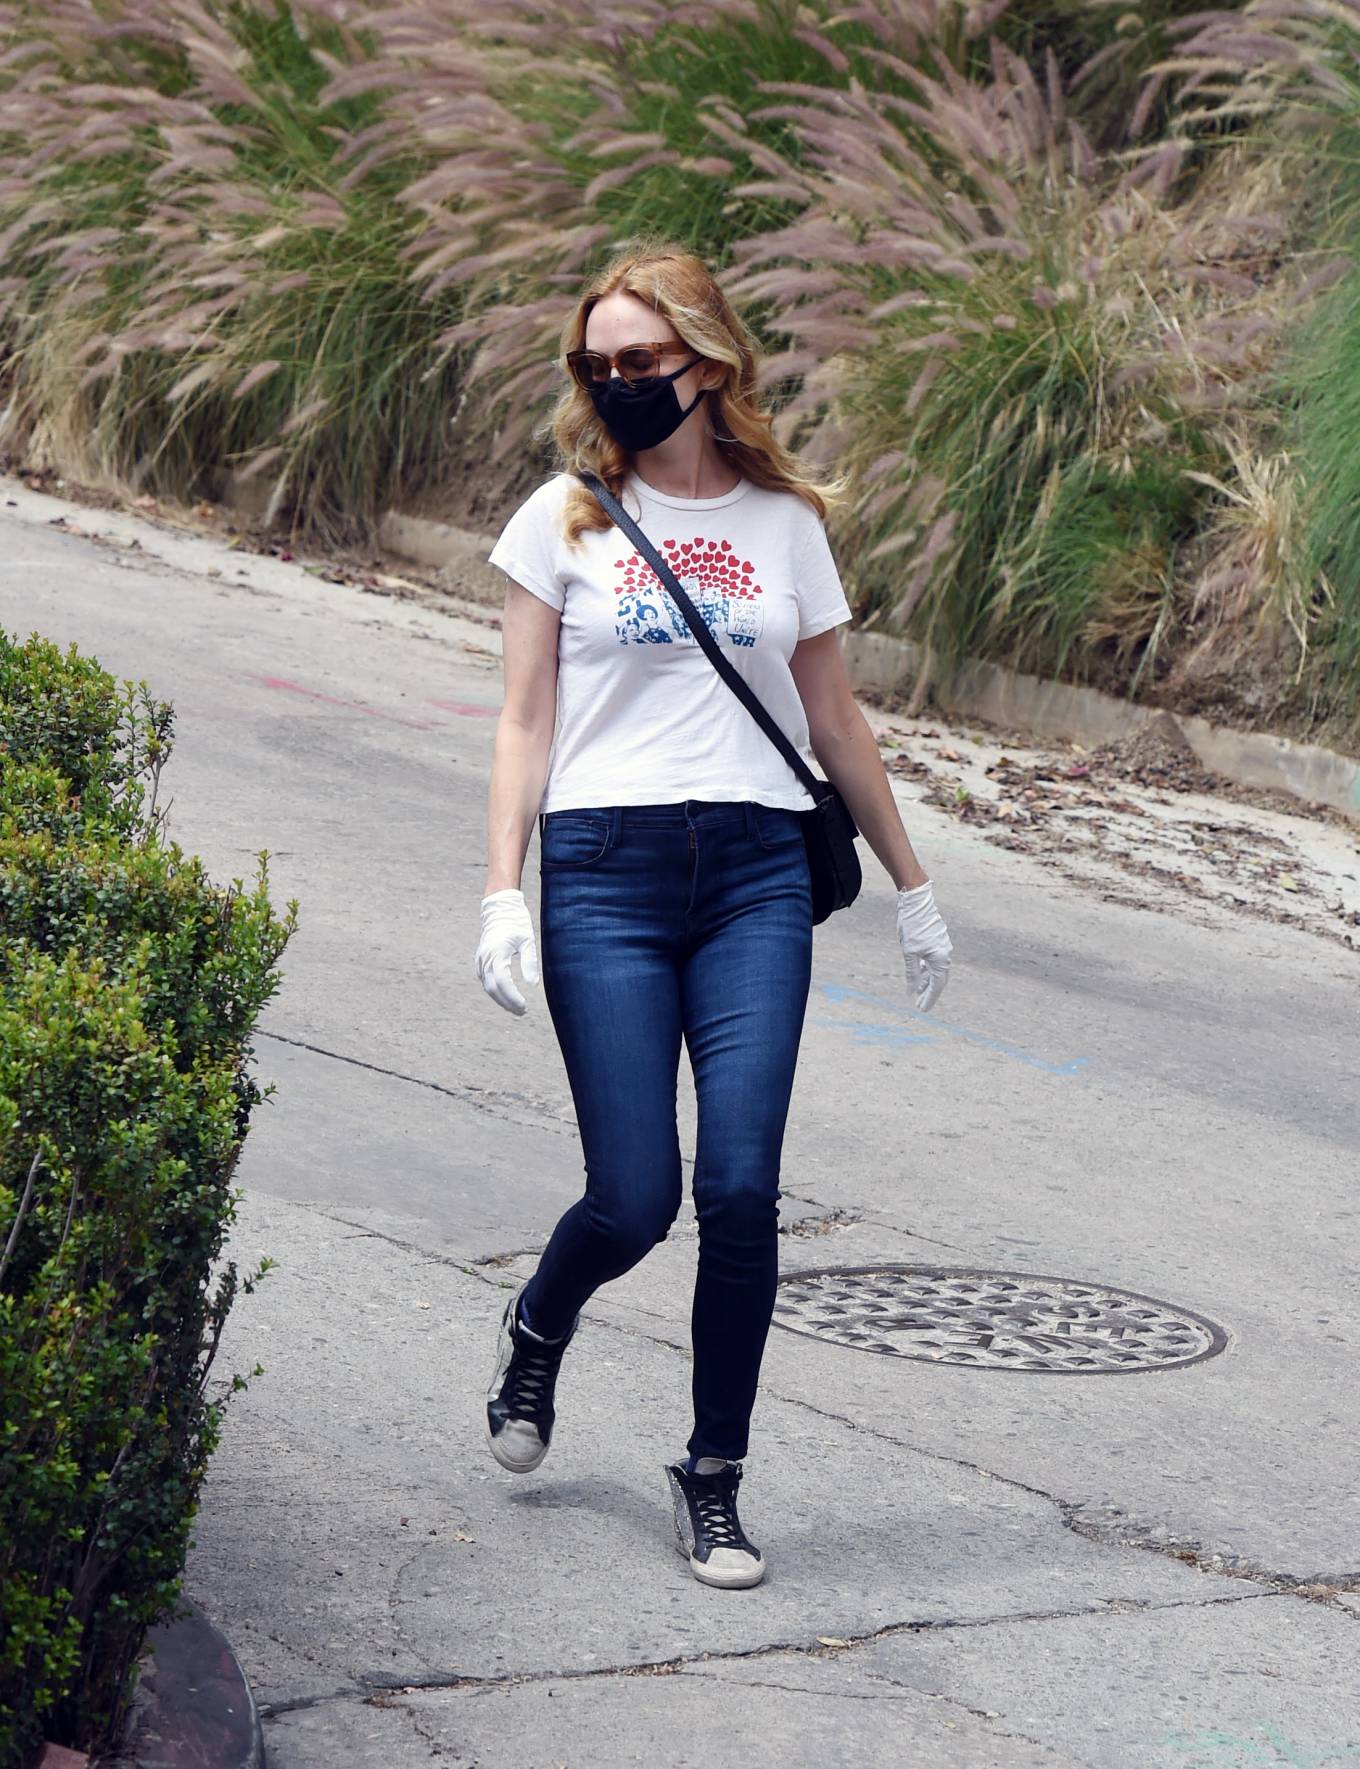 Heather Graham 2020 : Heather Graham in Jeans – Out in Los Angeles-06